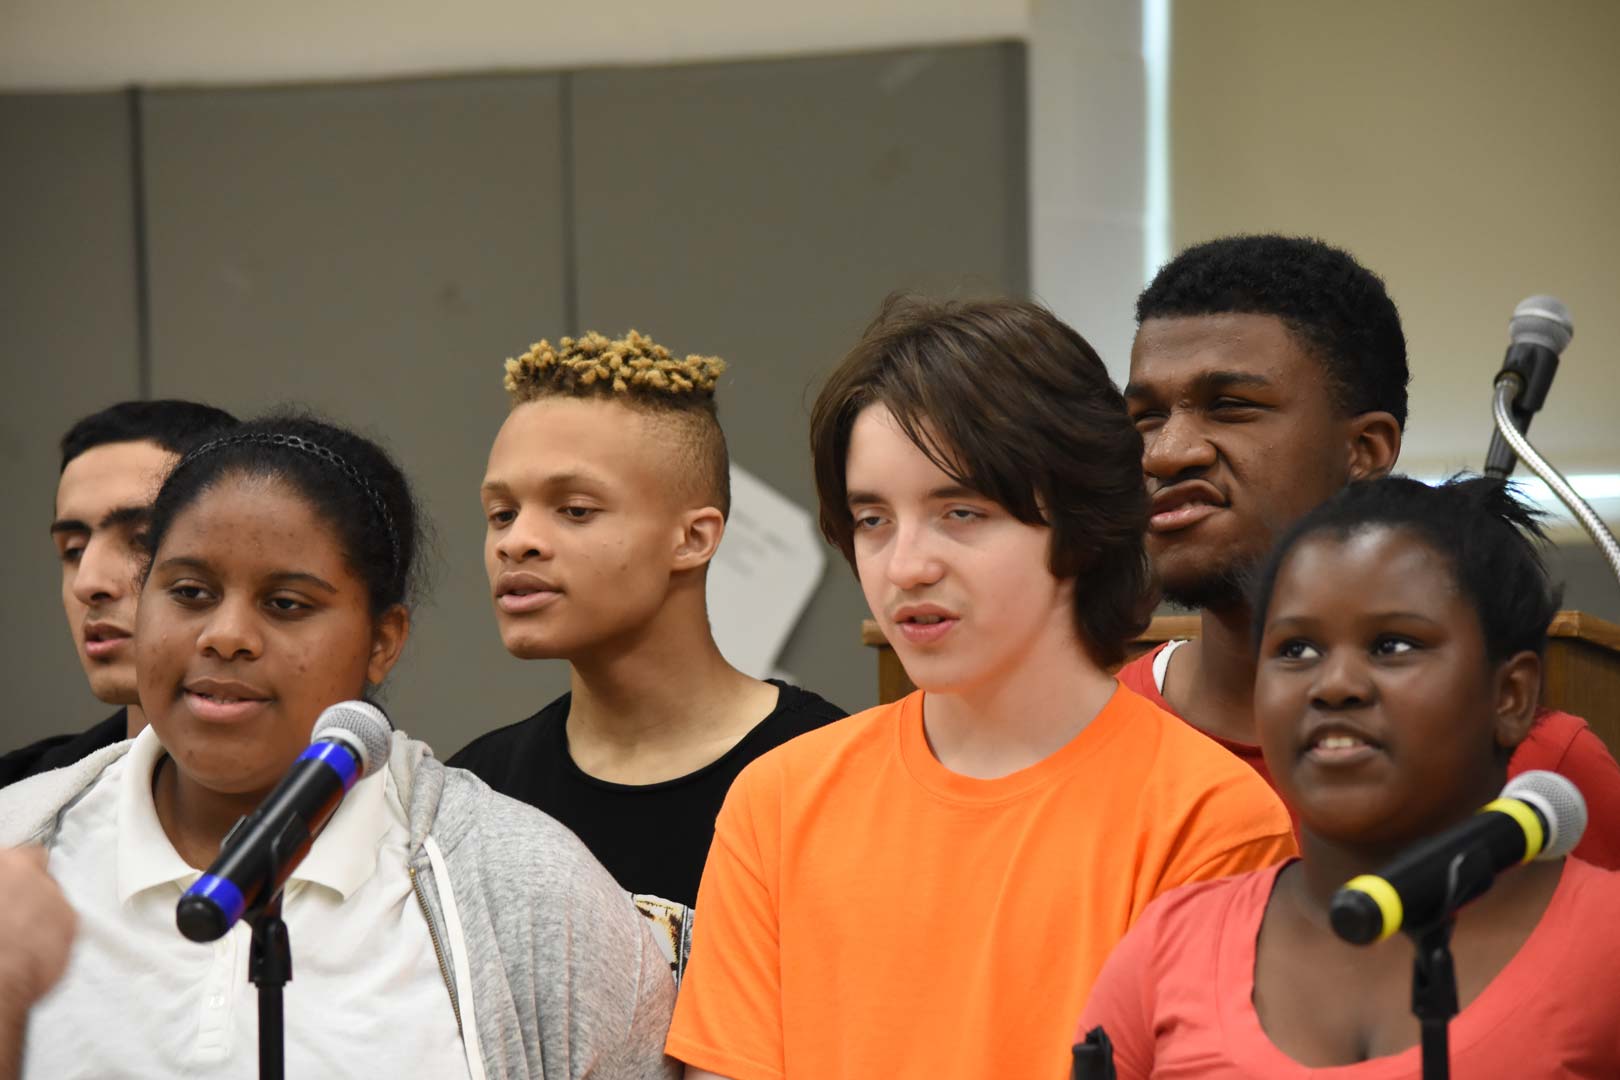 A group of middle school choir students singing.